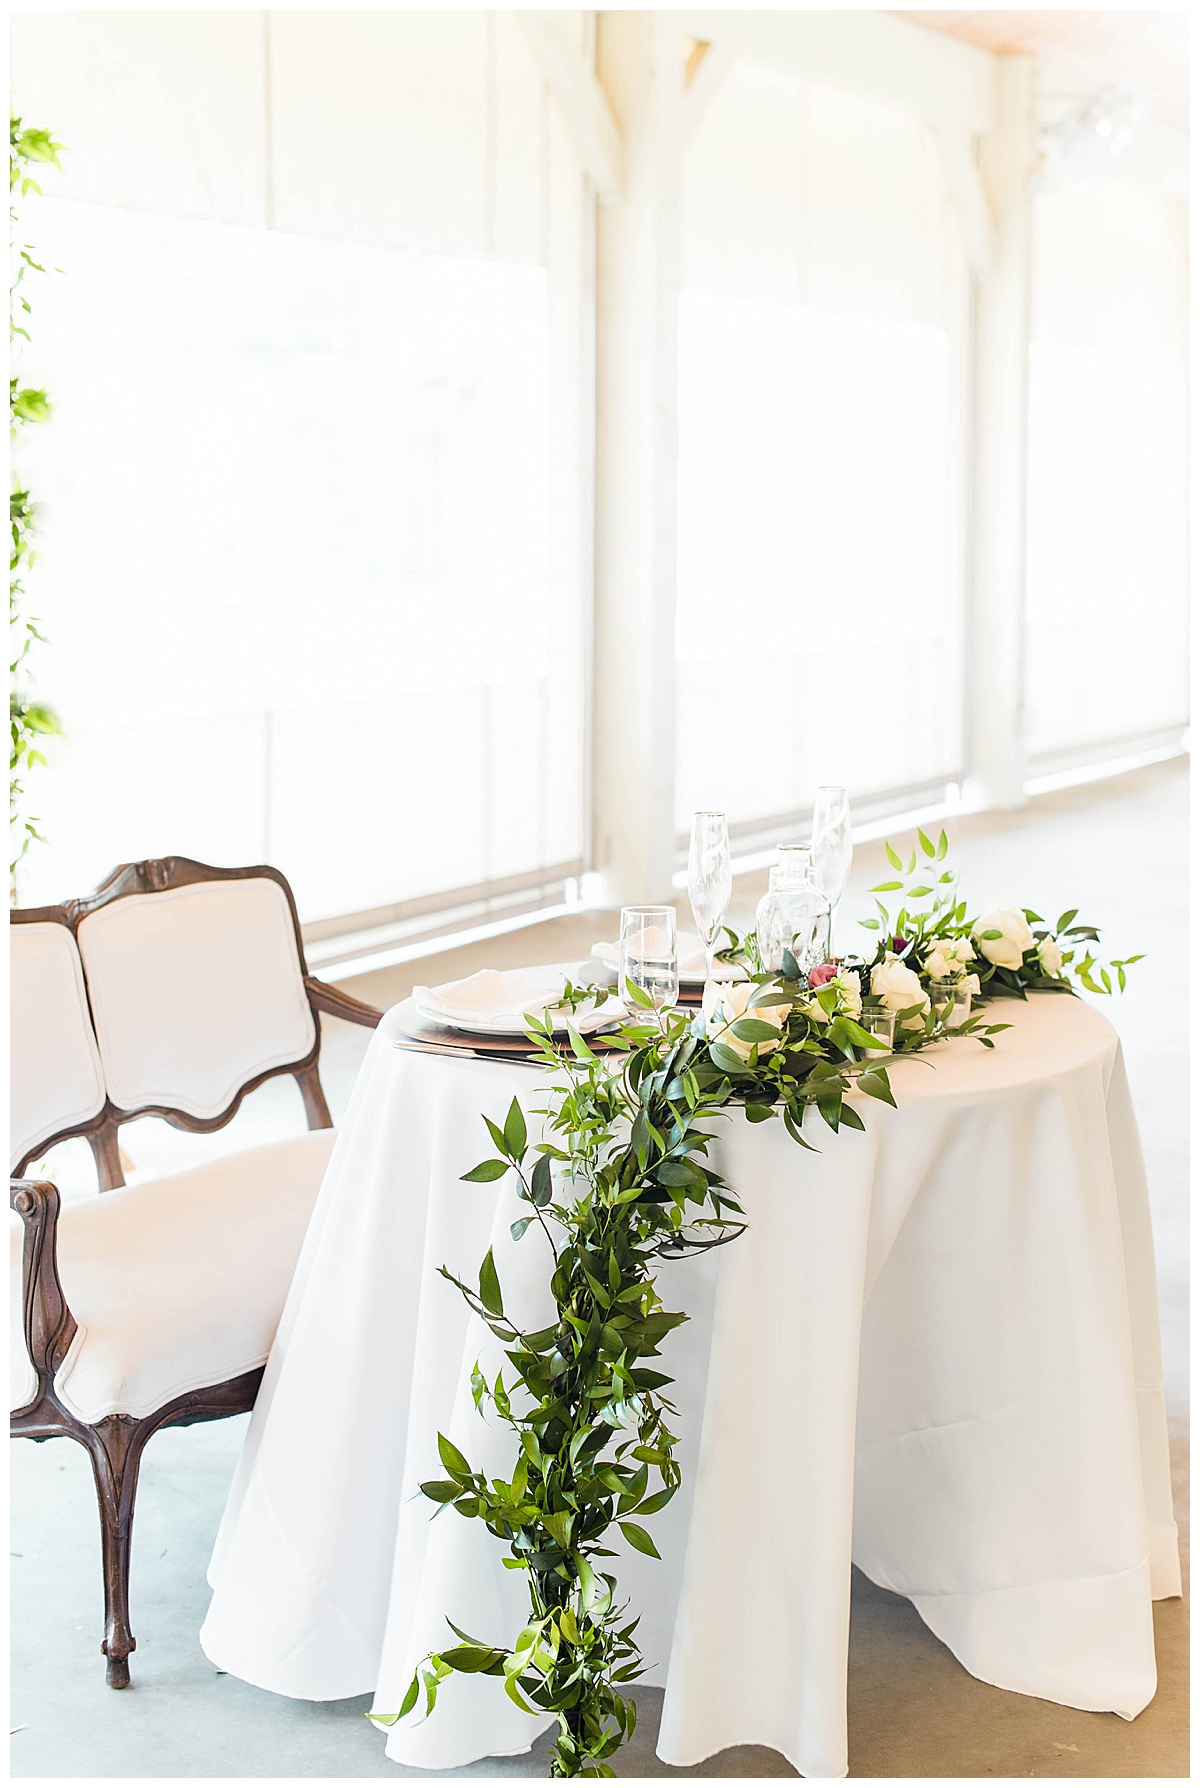 Wood Grain and Greenery Seven Springs Farm Wedding: Sweetheart Table and Wedding Reception Details